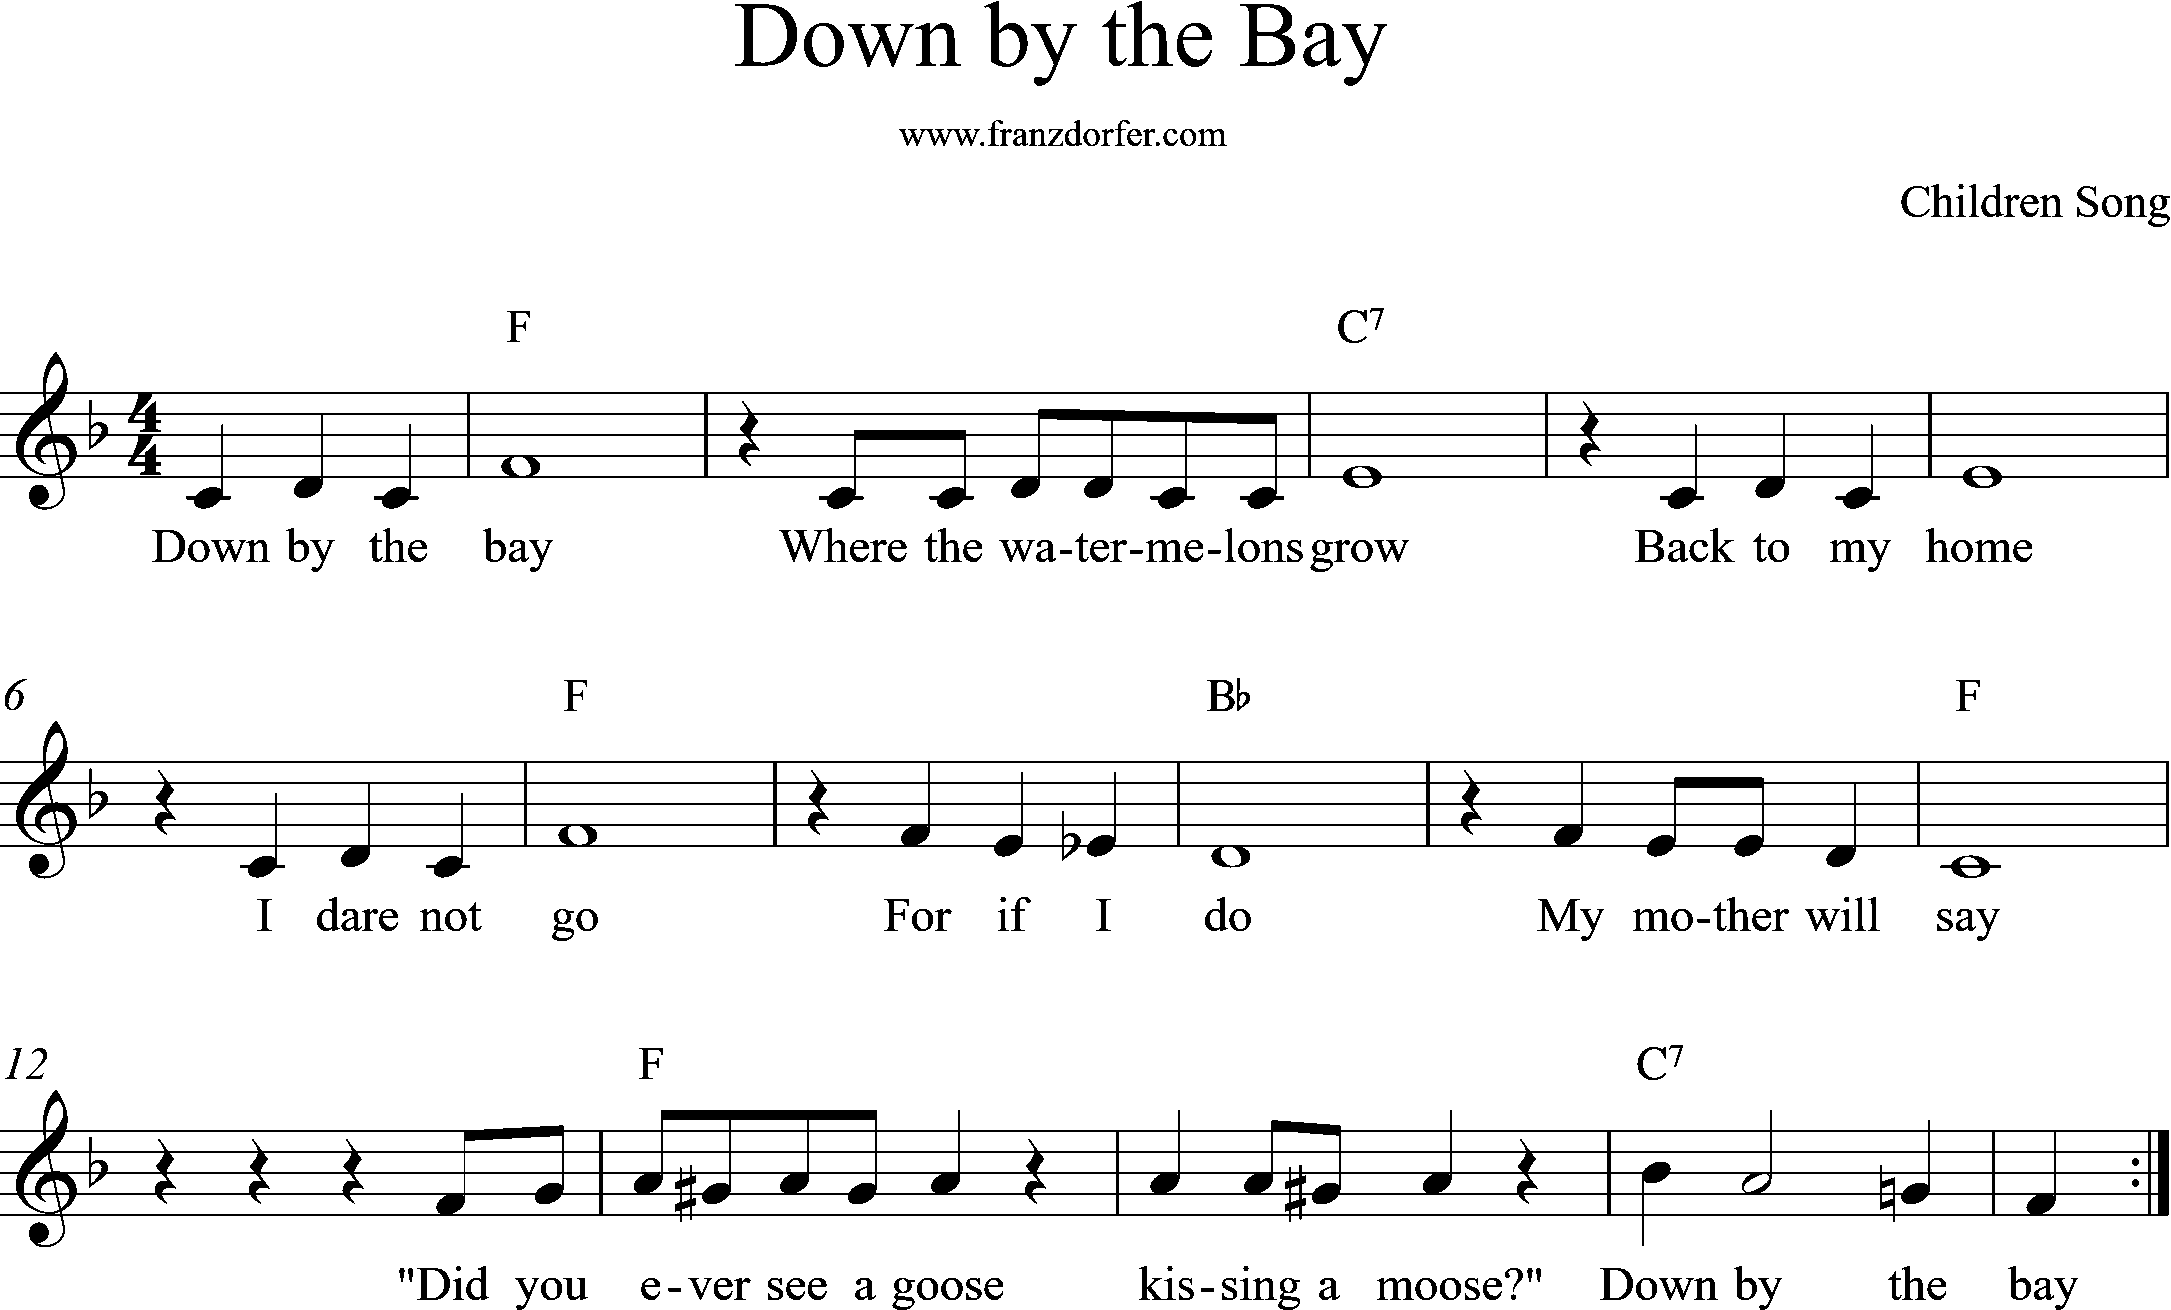 sheetmusic- Down by the bay